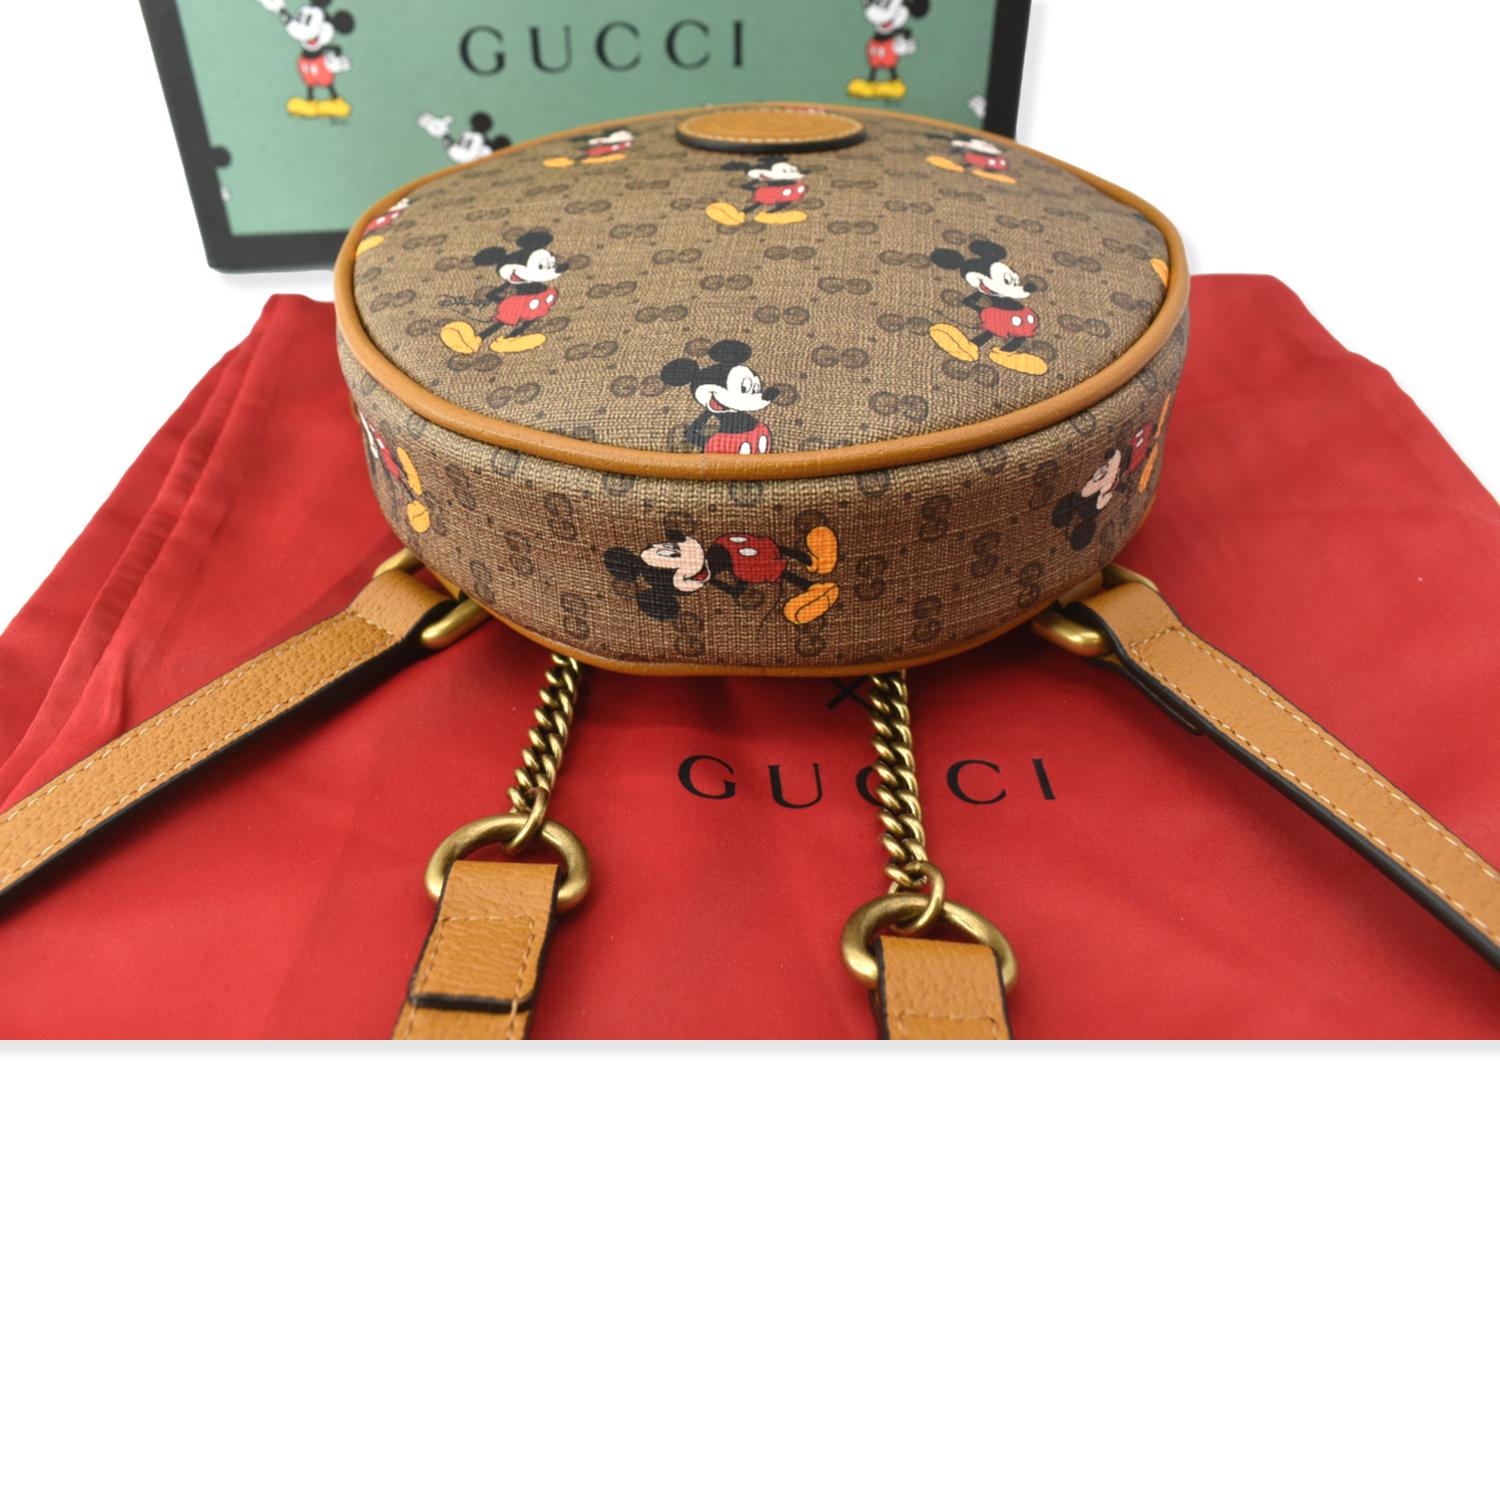 Gucci Beige GG Supreme Mickey Mouse Canvas Round Backpack Gucci